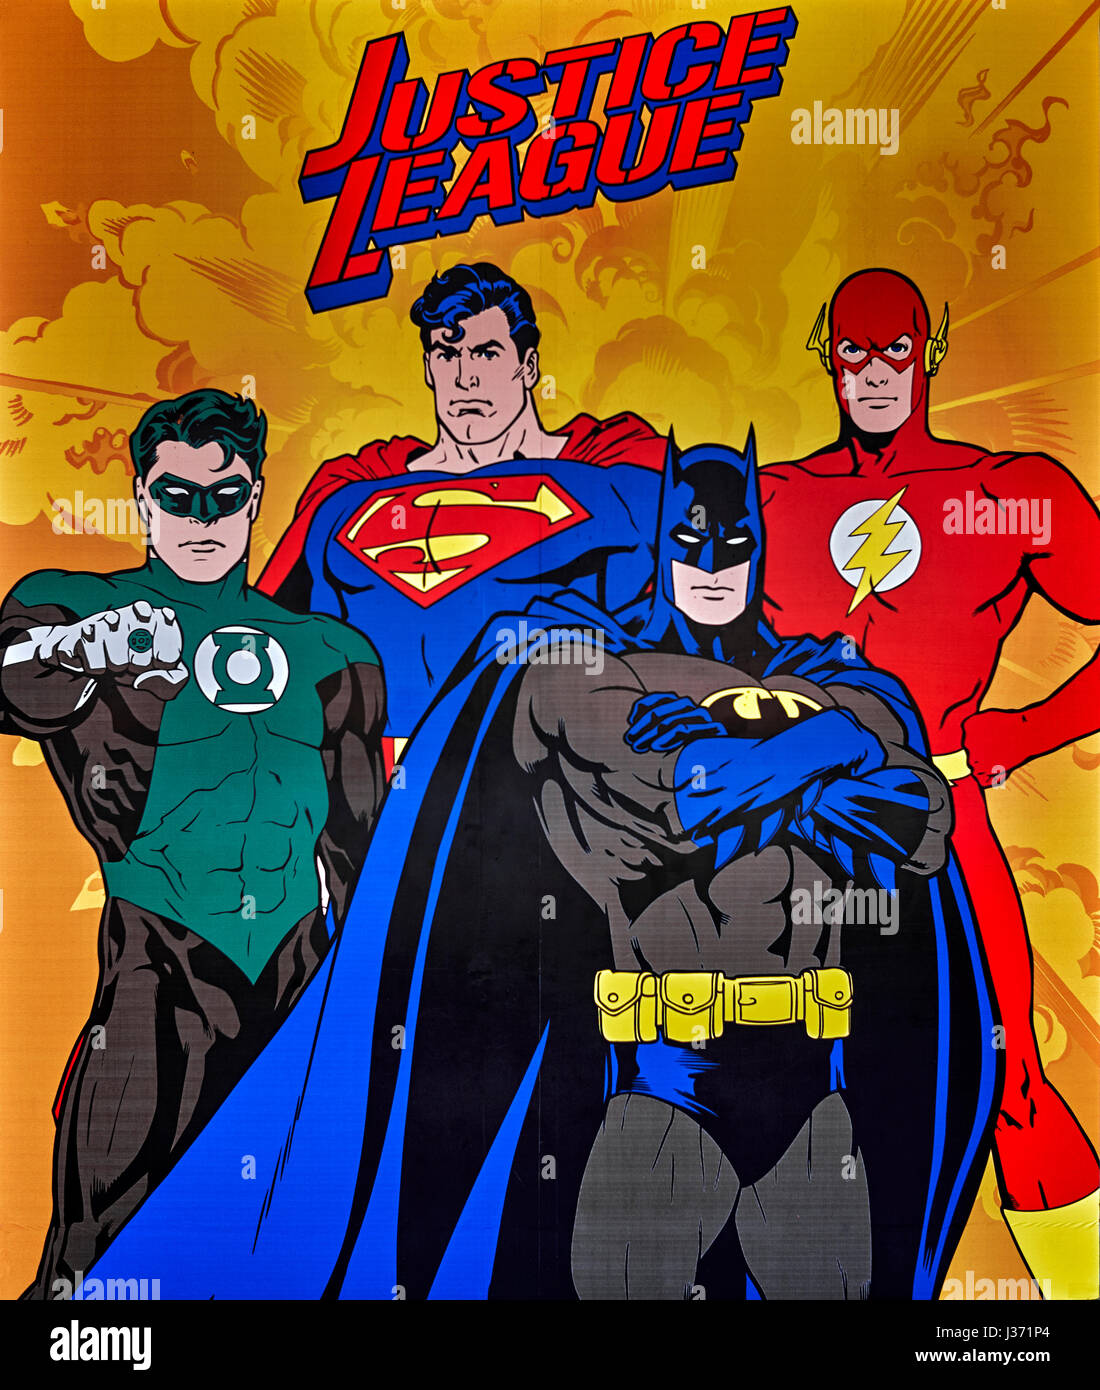 Justice League Poster , Superheroes Stock Photo